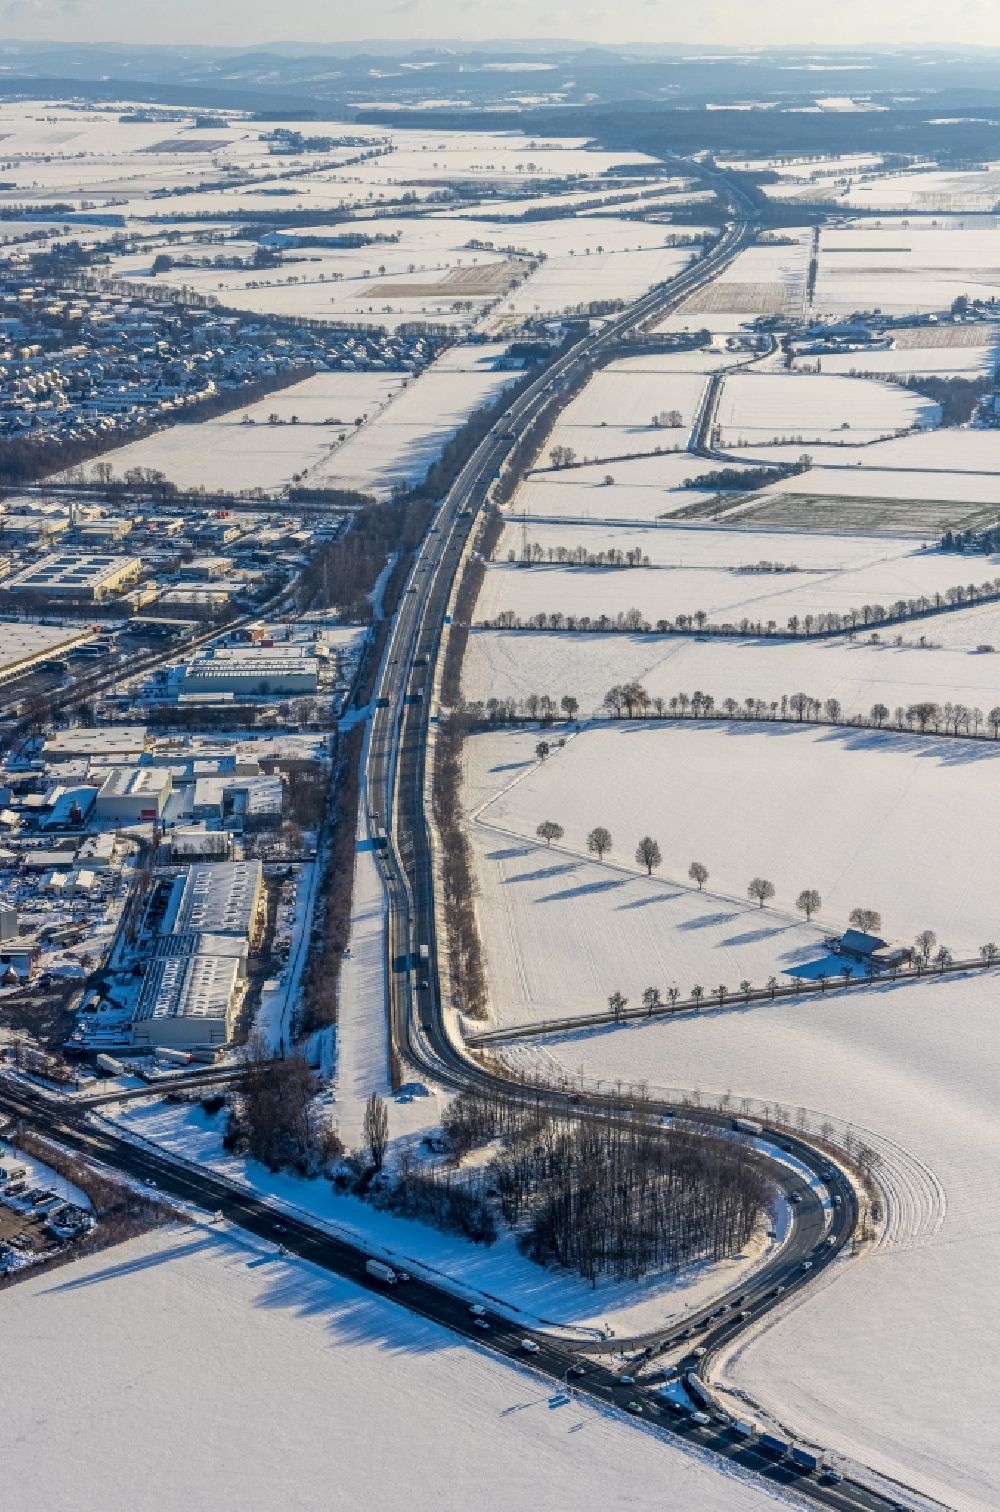 Werl from the bird's eye view: Wintry snowy route and lanes in the course of the exit and access of the motorway junction of the BAB A445 on Bundesstrasse B63 am Industriegebiet on Hammer Strasse in Werl at Ruhrgebiet in the state North Rhine-Westphalia, Germany